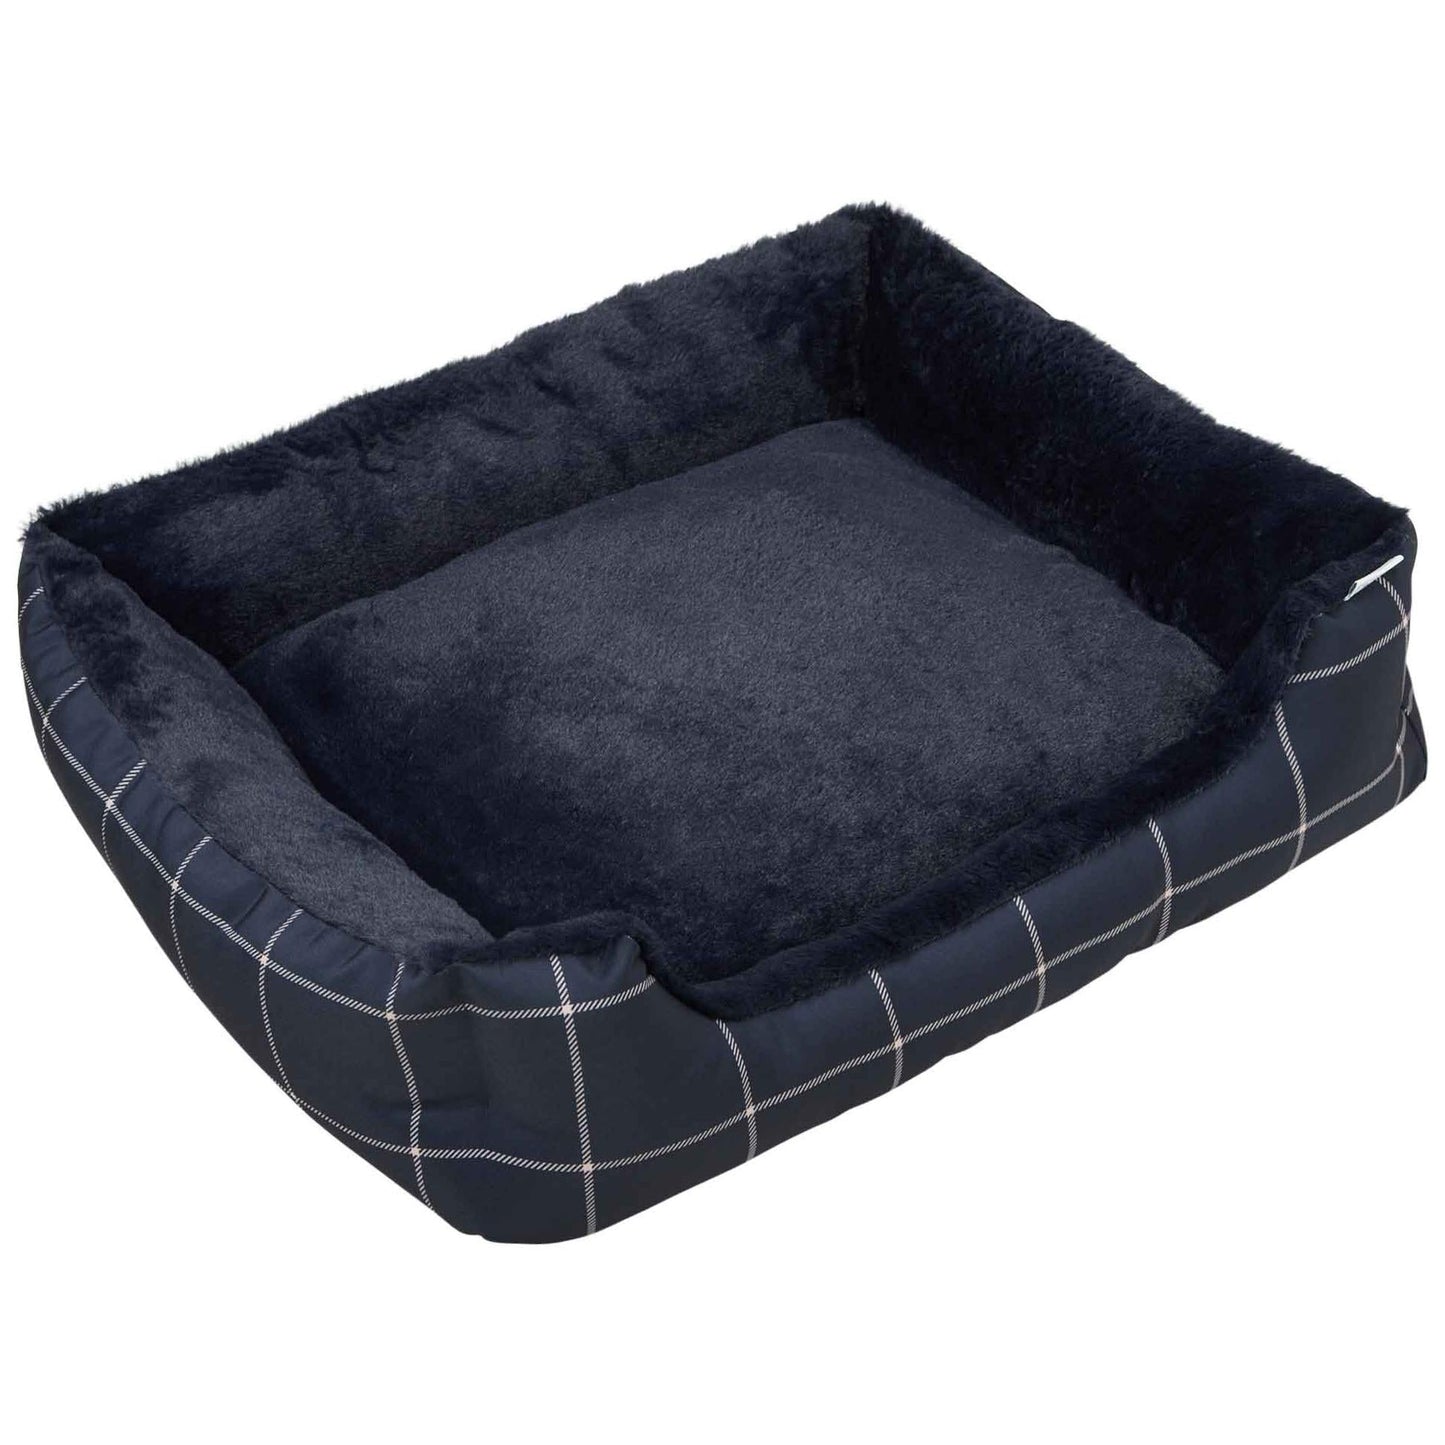 Lexi & Me Bolster Dog Bed French Navy Large